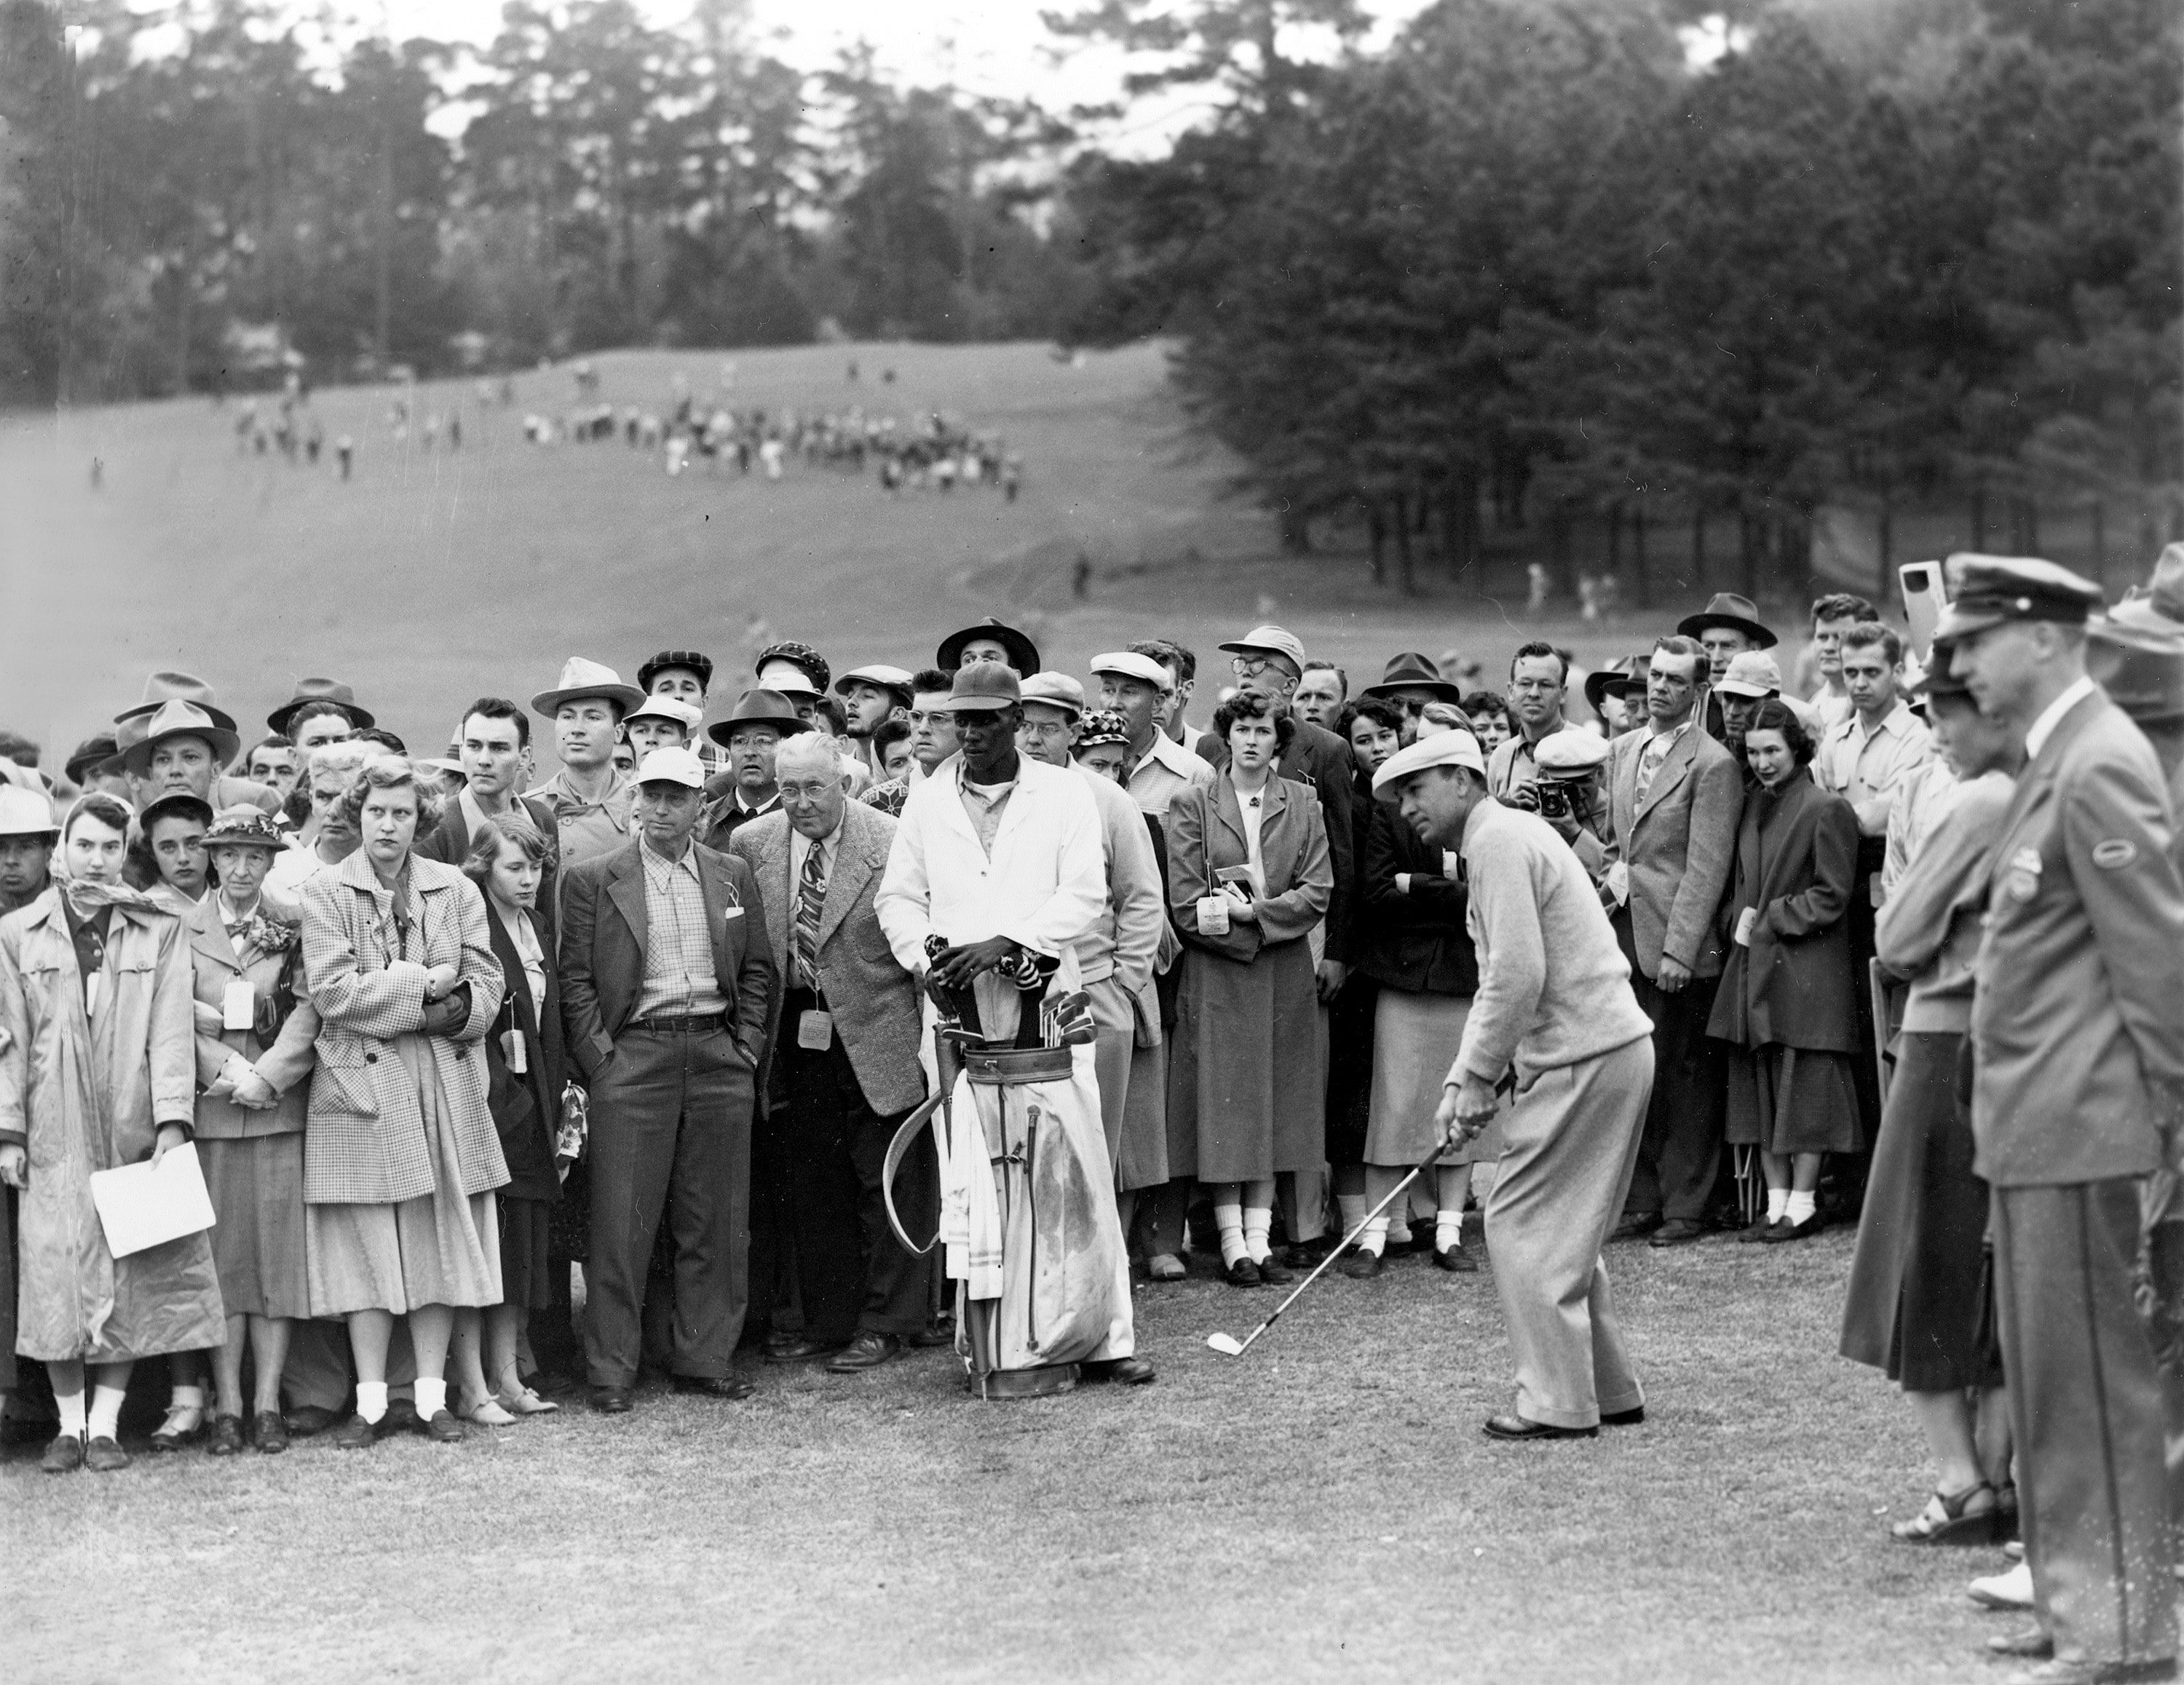 For Nearly 50 Years, Only Black Men Caddied The Masters. One Day, They All But Vanished